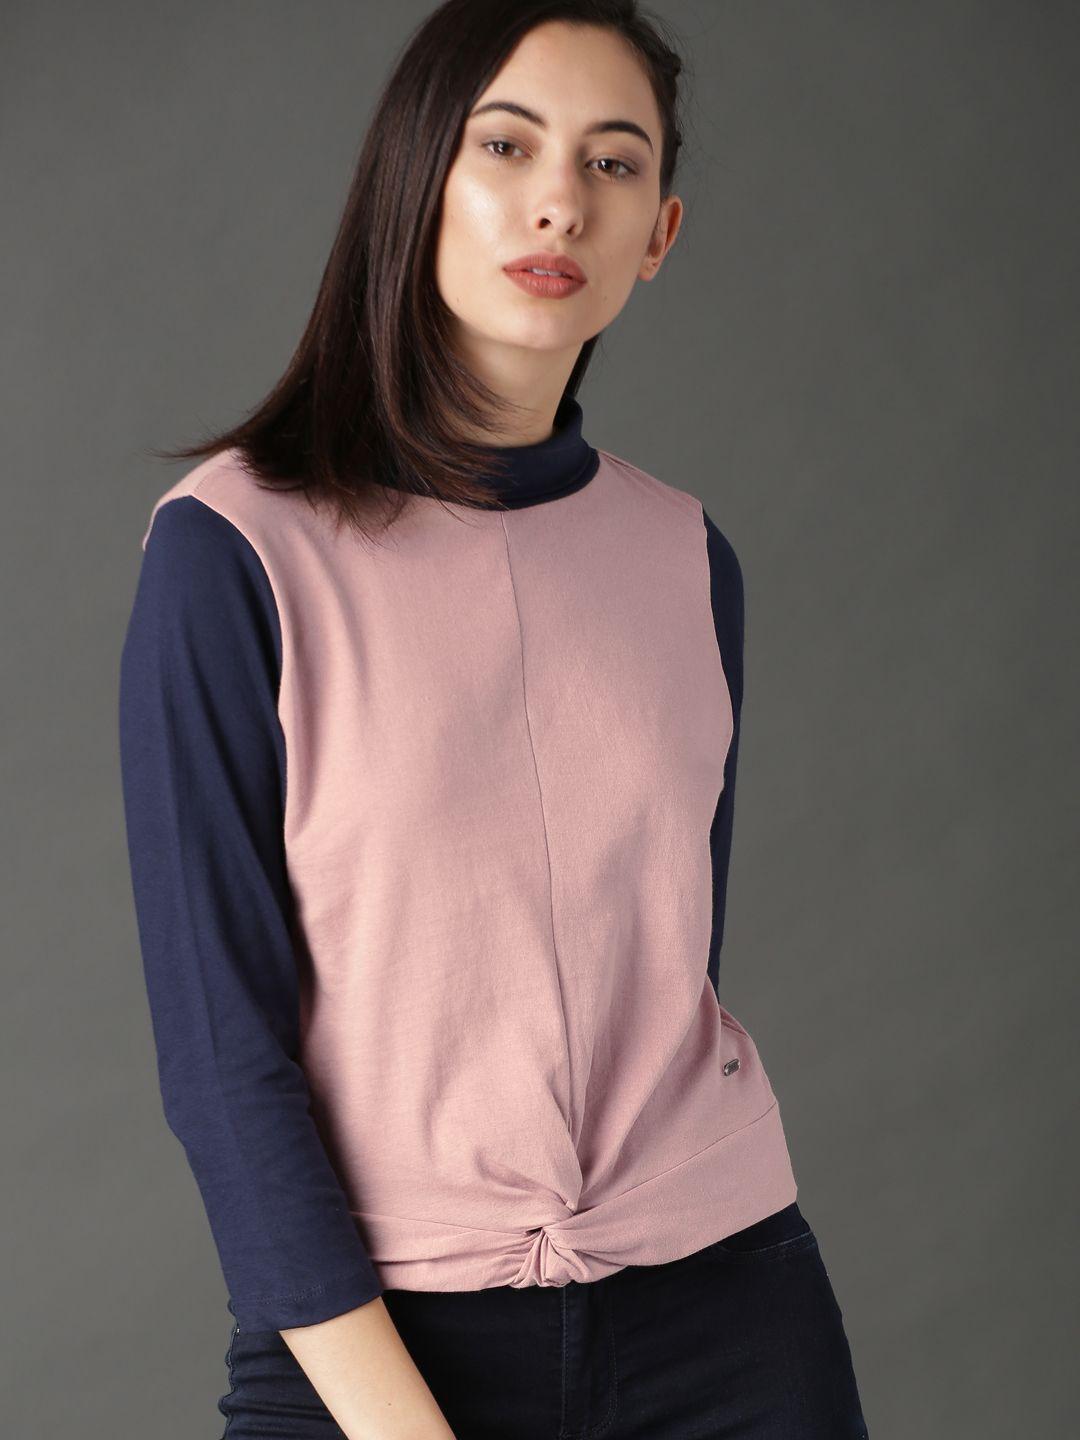 roadster women pink & navy blue colorblocked pure cotton top with knot detail